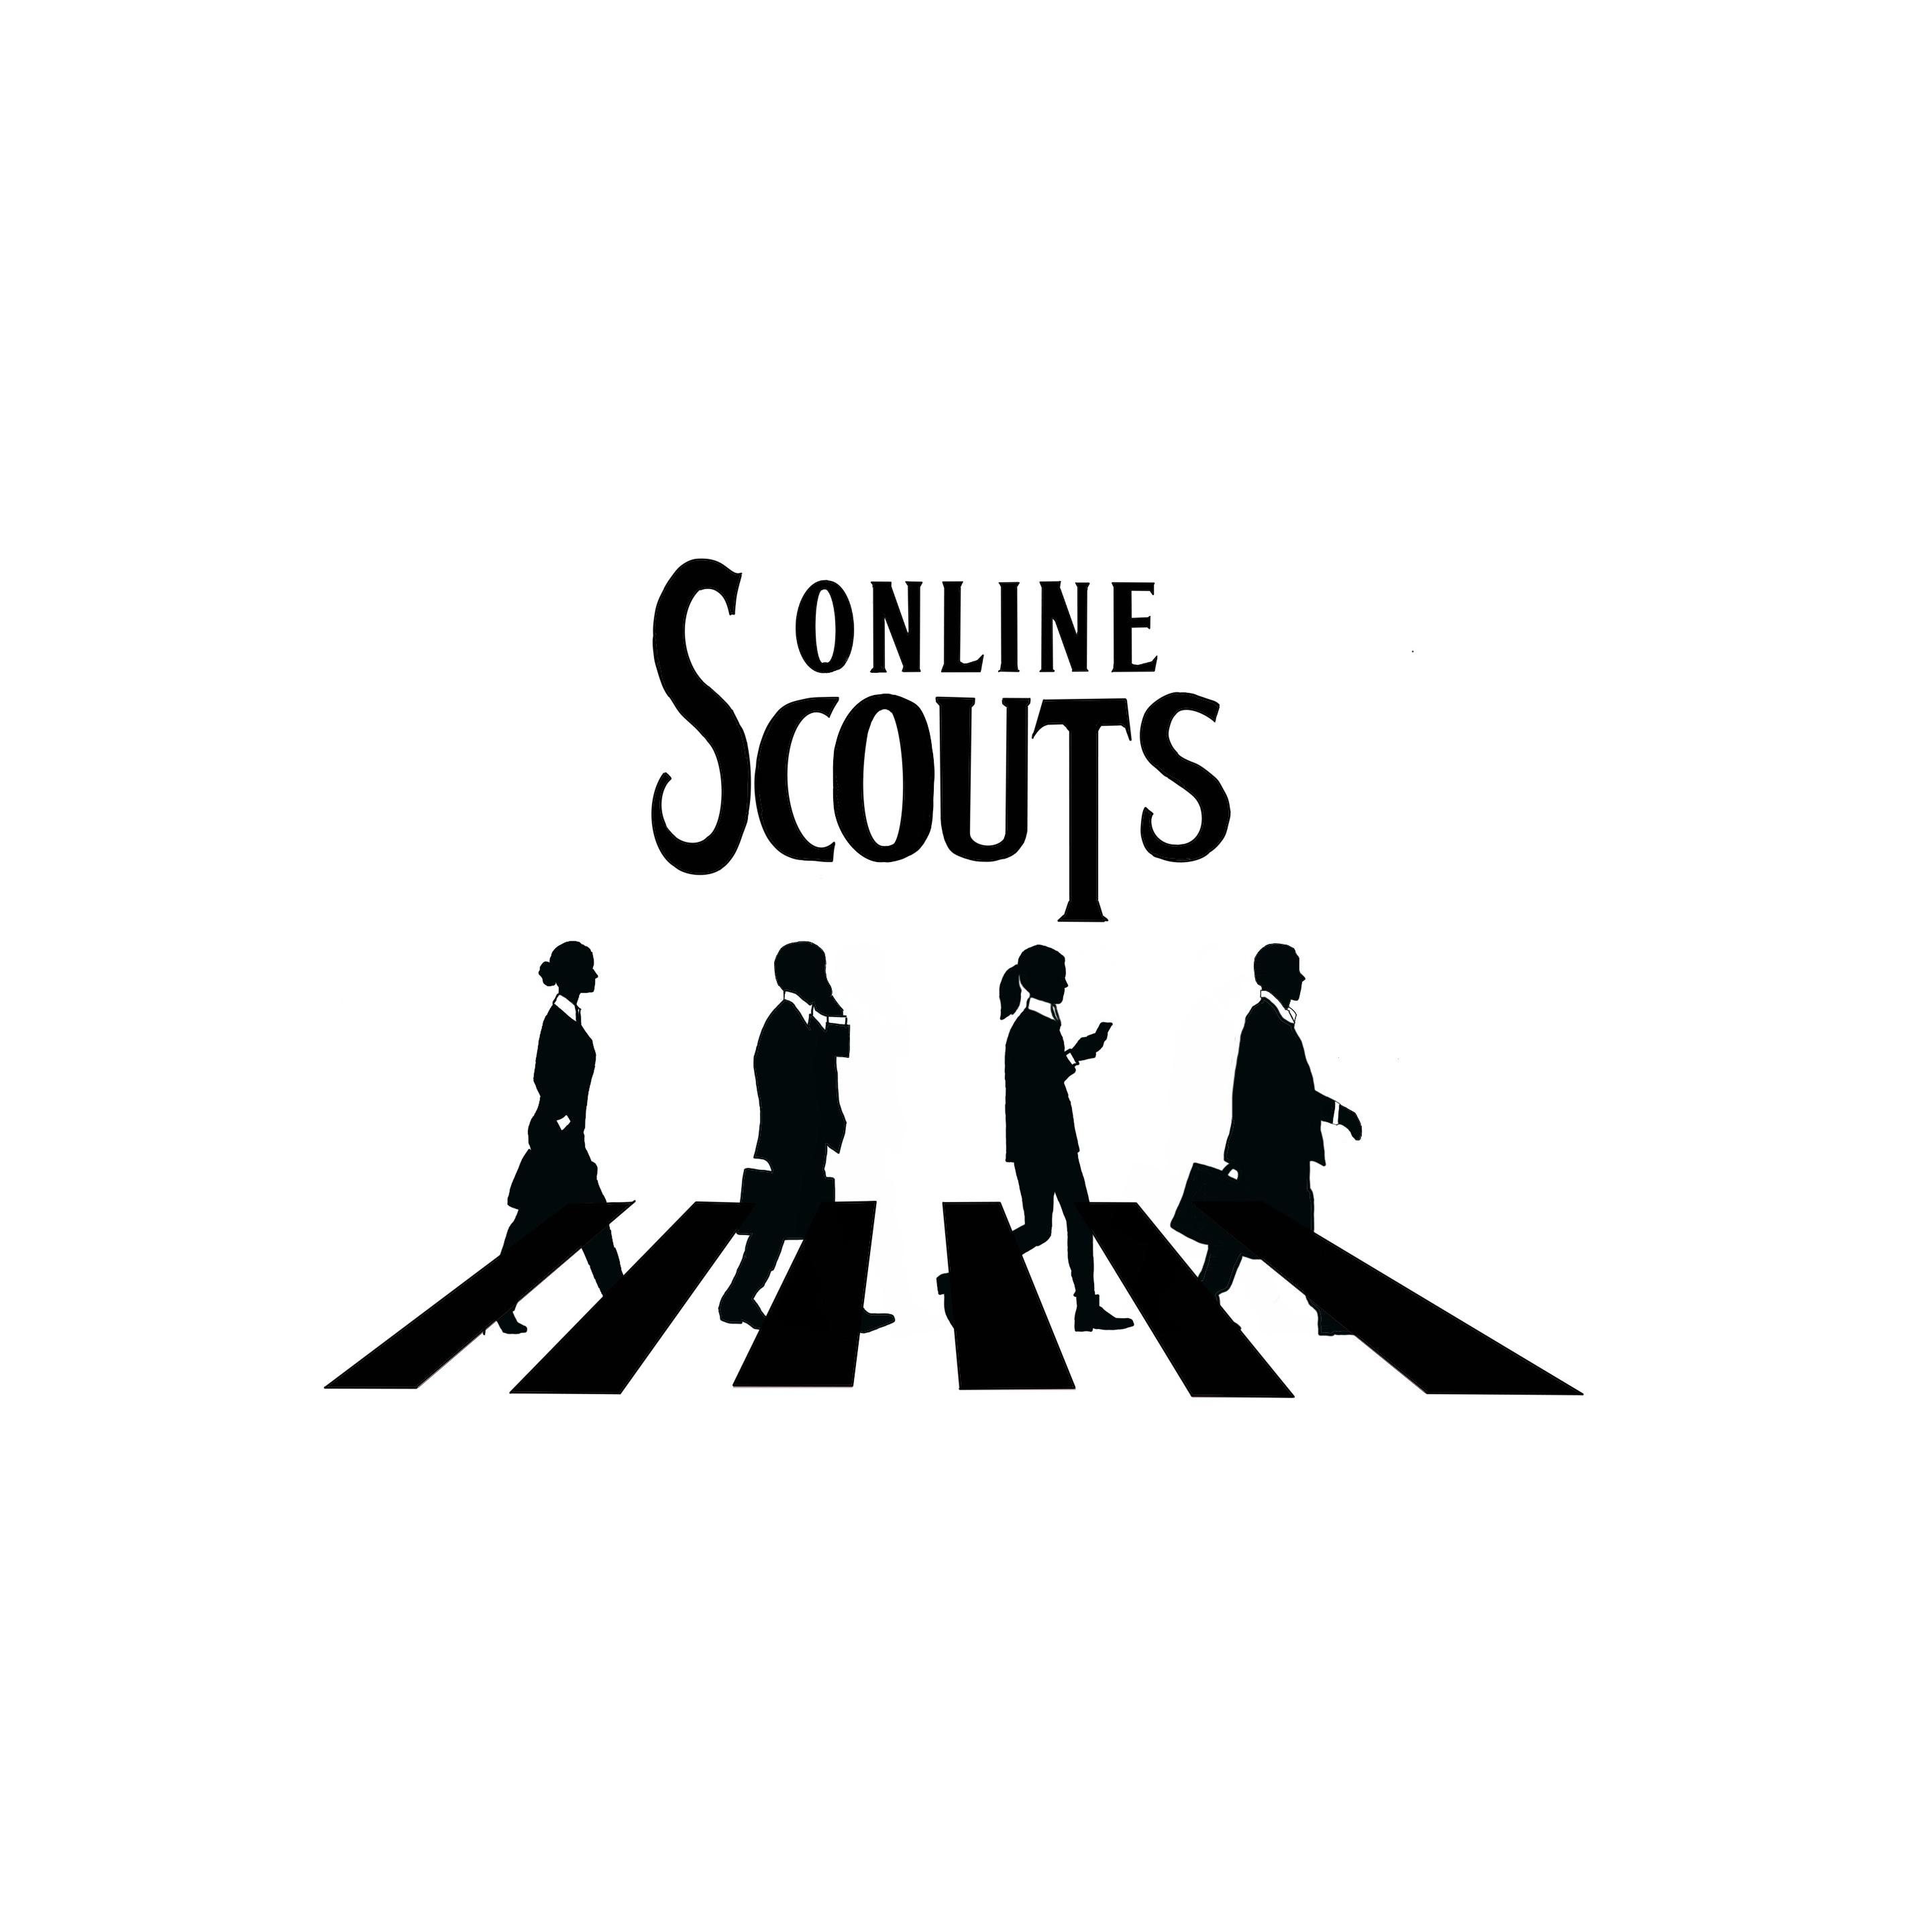 ONLINE SCOUTS Mayr & Leonhard GmbH & Co. KG in Altusried - Logo